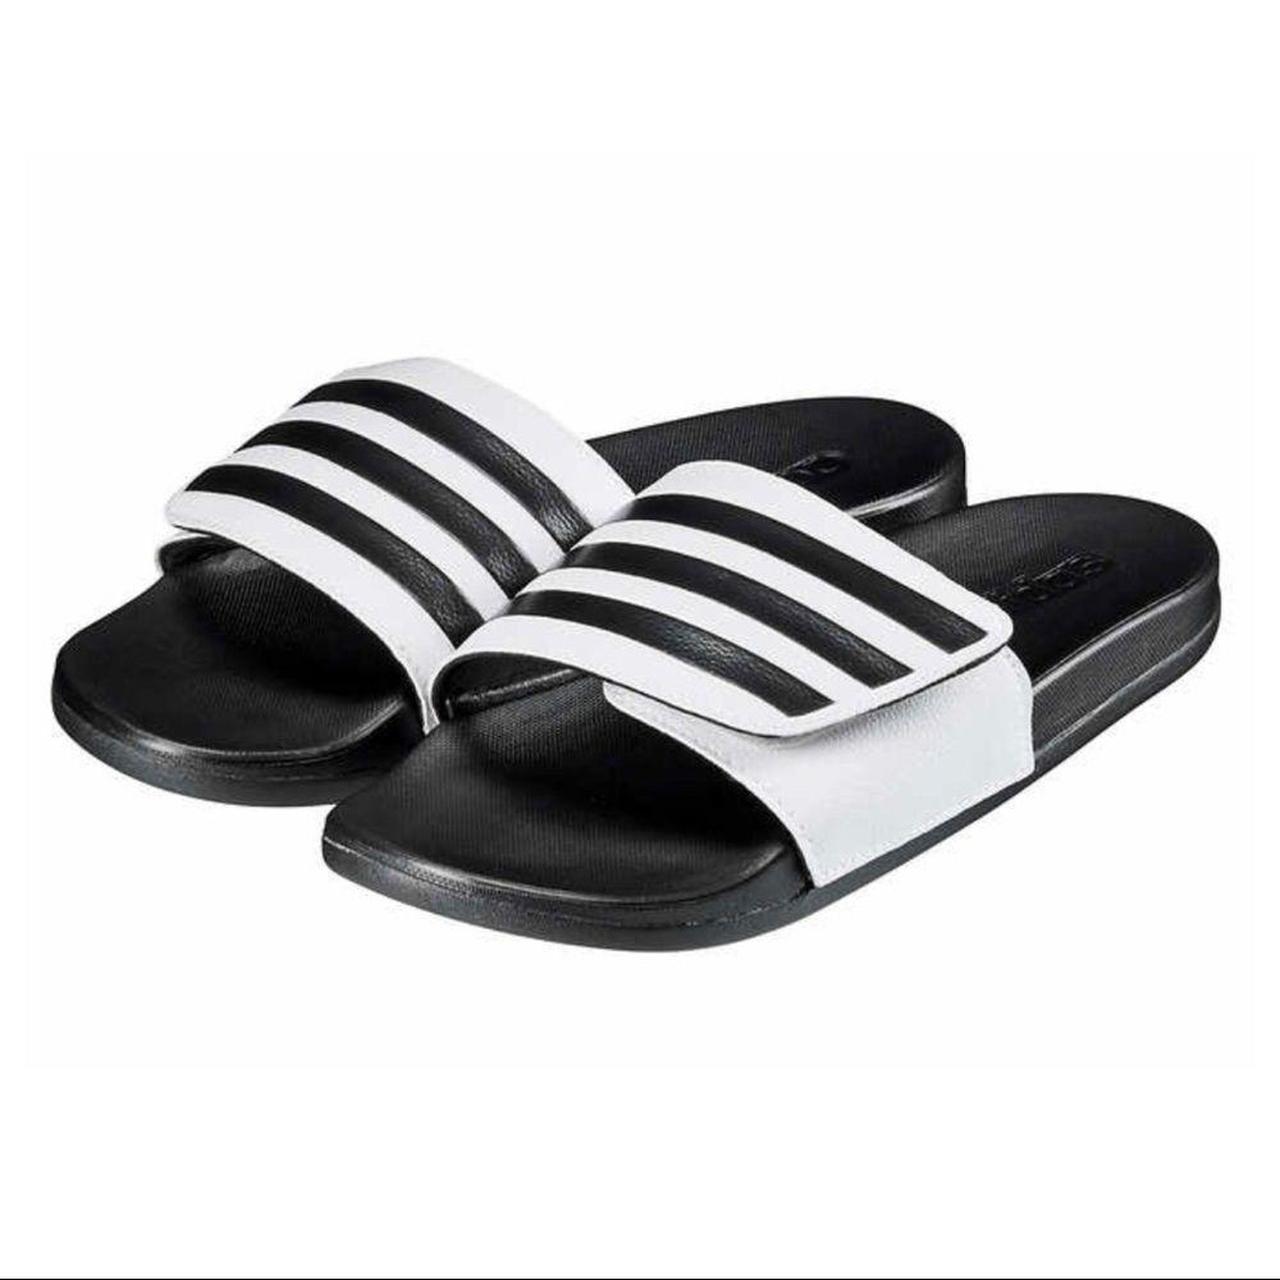 Product Image 2 - Features:                
* Brand Name: Adidas®
*